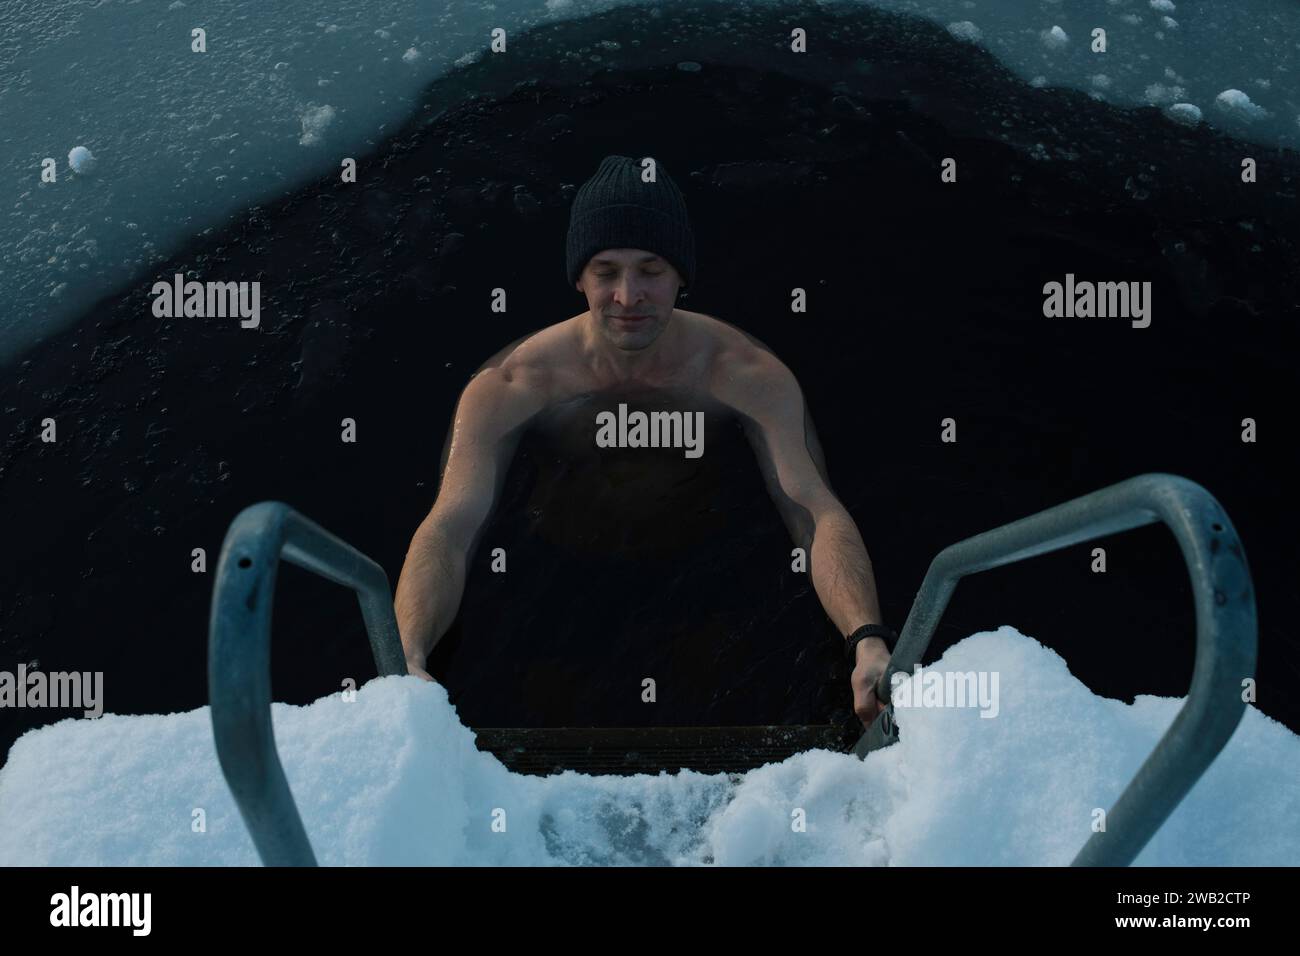 man breathing whilst taking a frozen water plunge in the Baltic sea Stock Photo